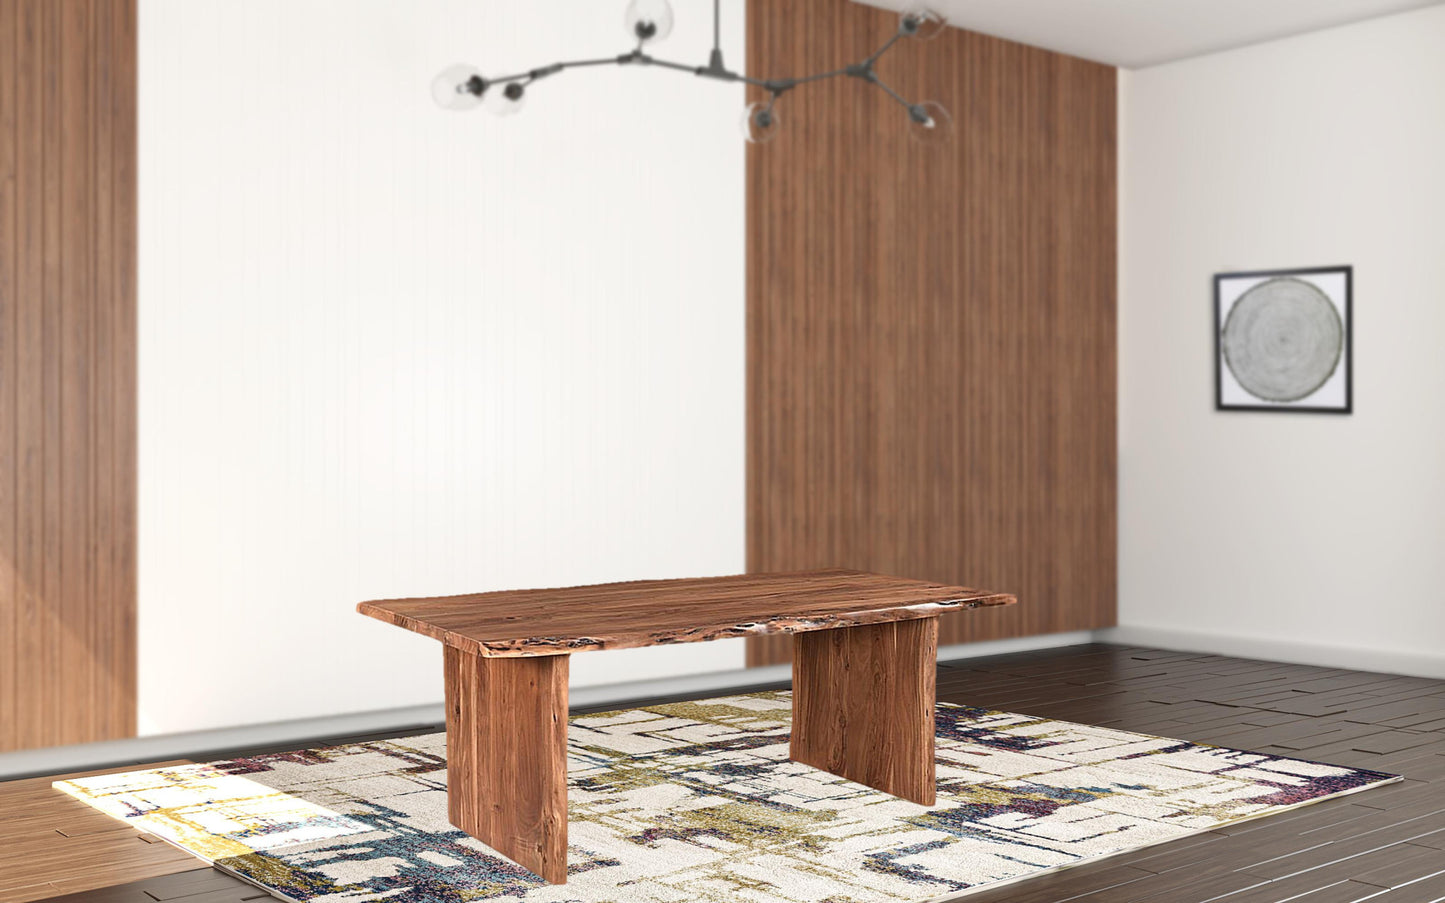 84" Brown Solid Wood Dining Table